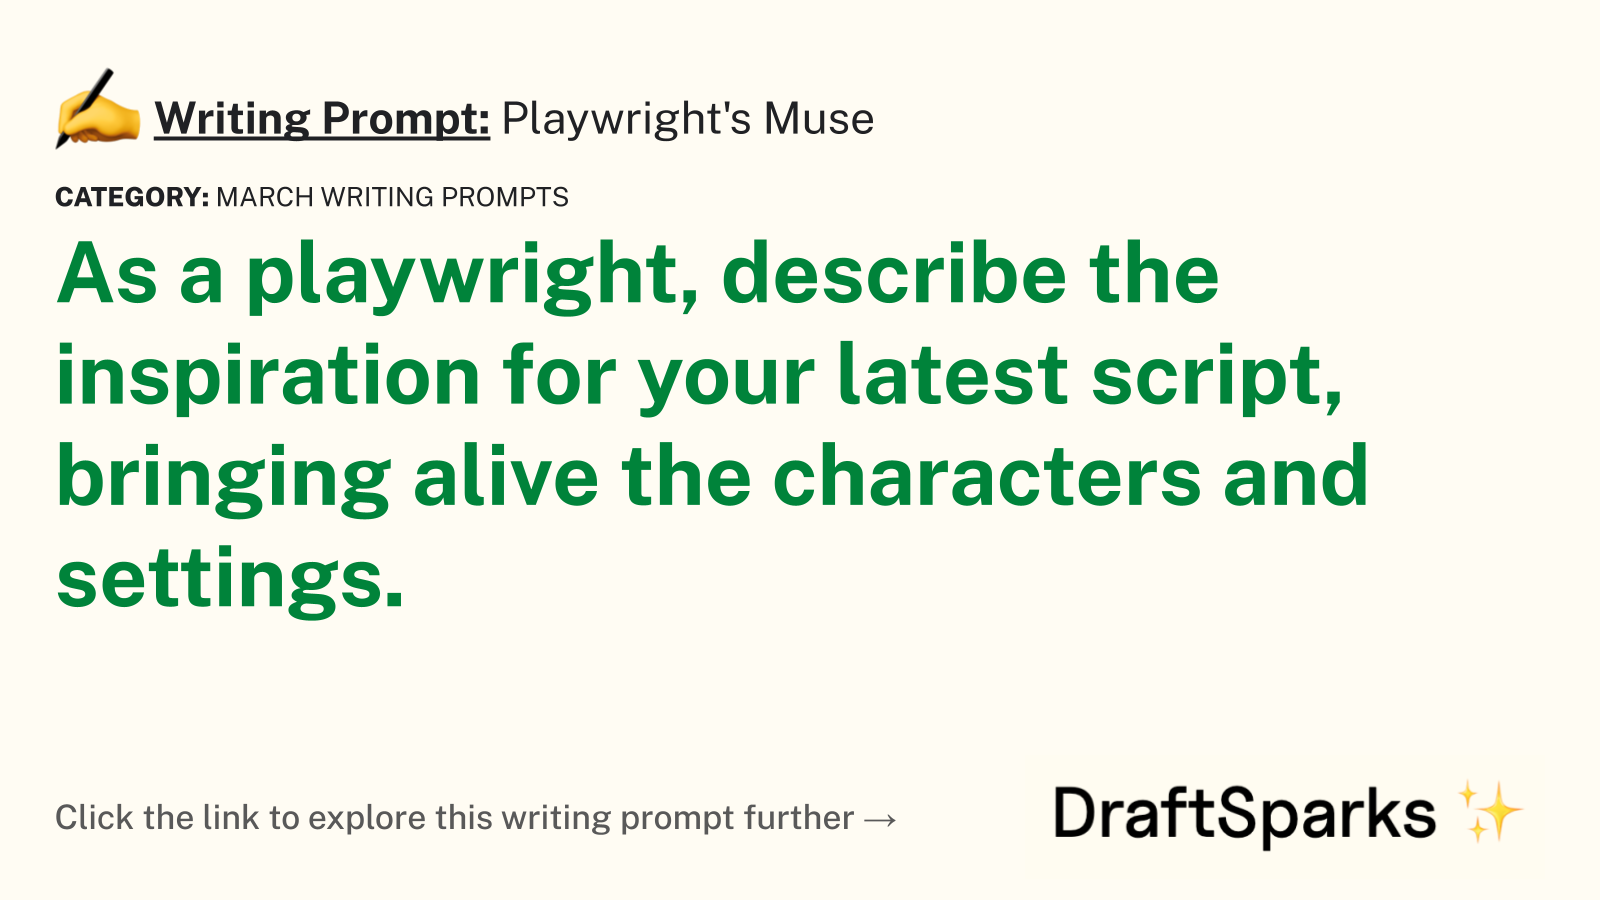 Playwright’s Muse